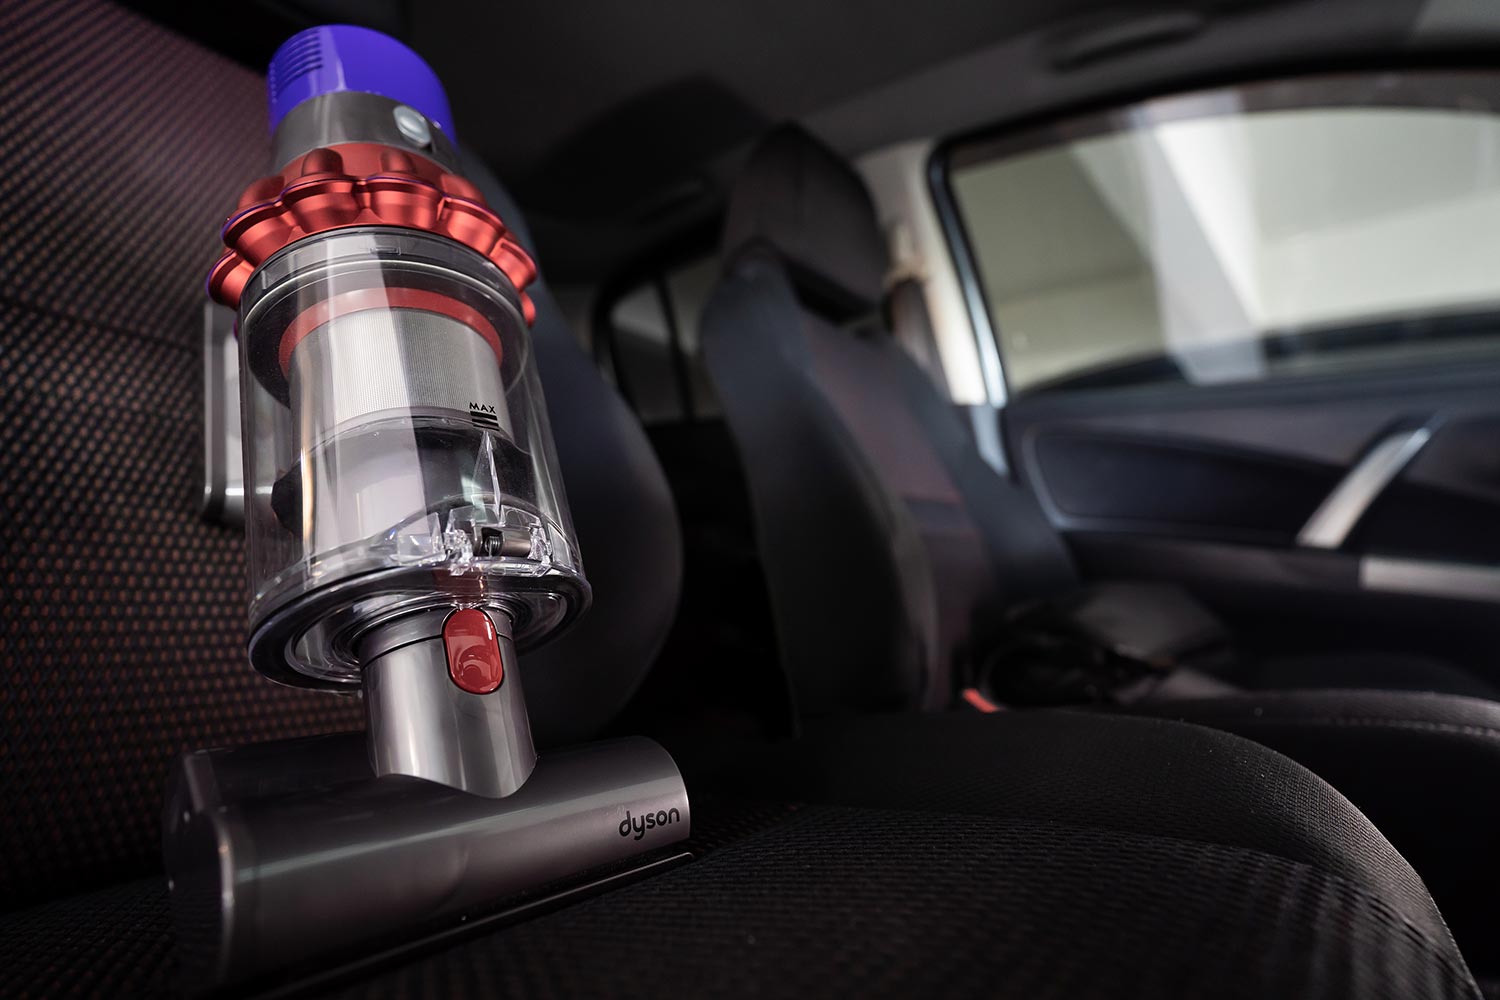 Dyson Cyclone V10 Fluffy vacuum cleaner on car seats